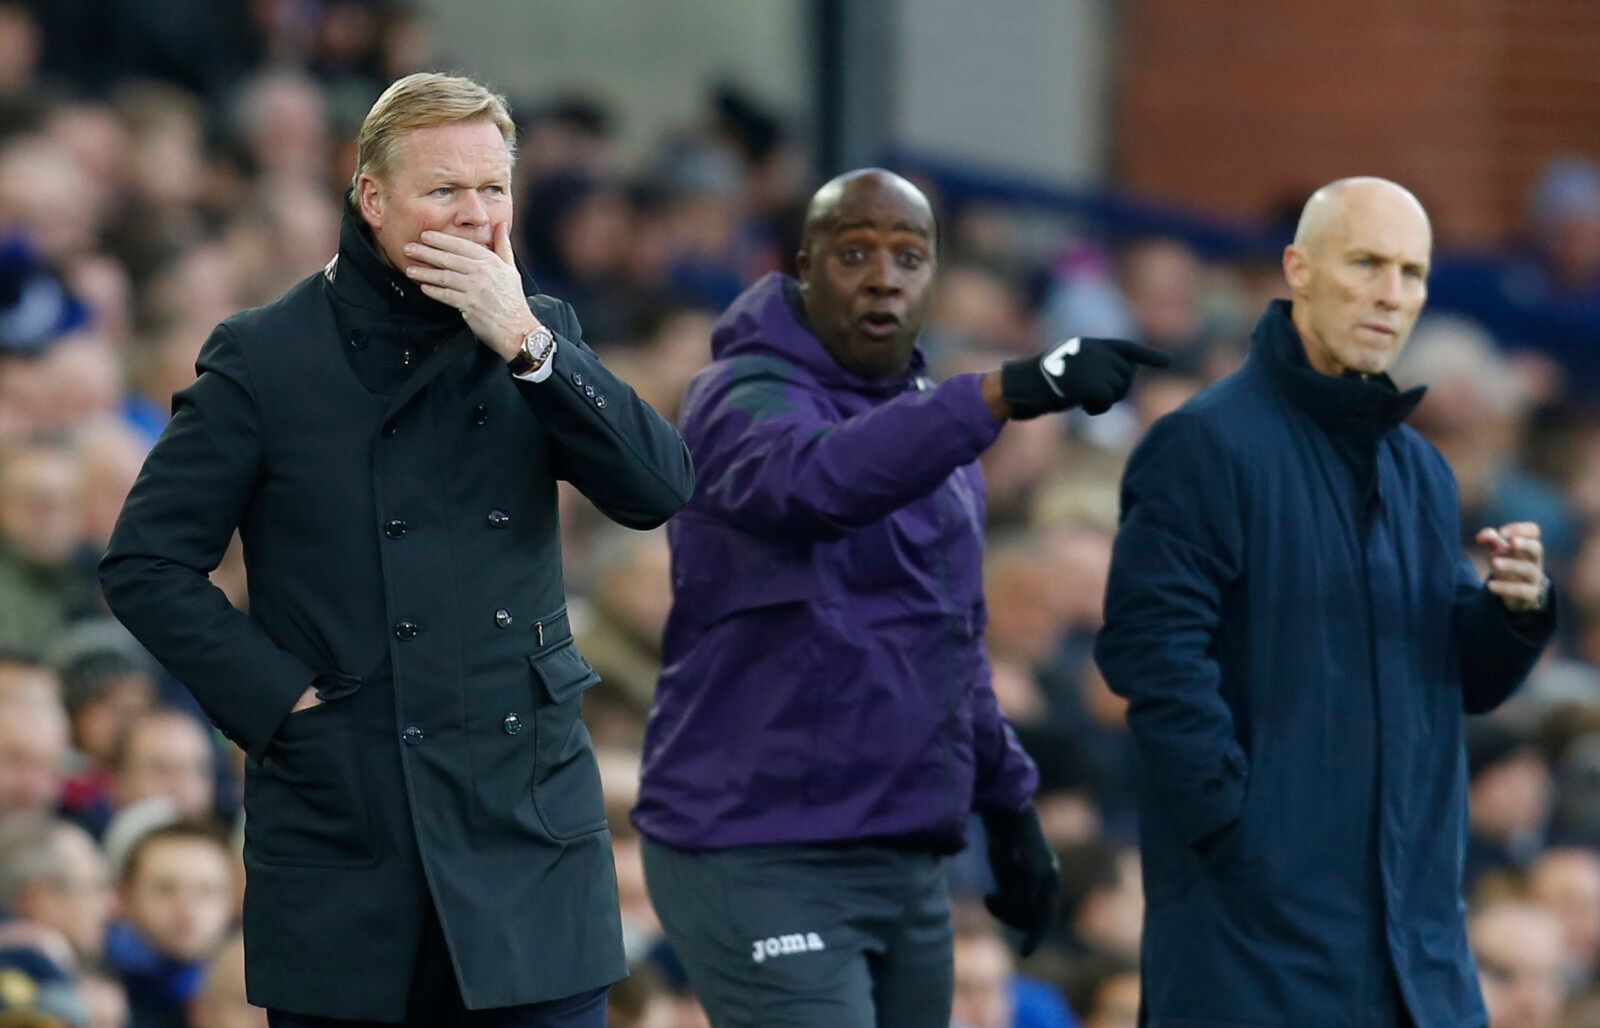 Britain Football Soccer - Everton v Swansea City - Premier League - Goodison Park - 19/11/16 Everton manager Ronald Koeman and Swansea City manager Bob Bradley with assistant manager Paul Williams  Action Images via Reuters / Ed Sykes Livepic EDITORIAL USE ONLY. No use with unauthorized audio, video, data, fixture lists, club/league logos or 